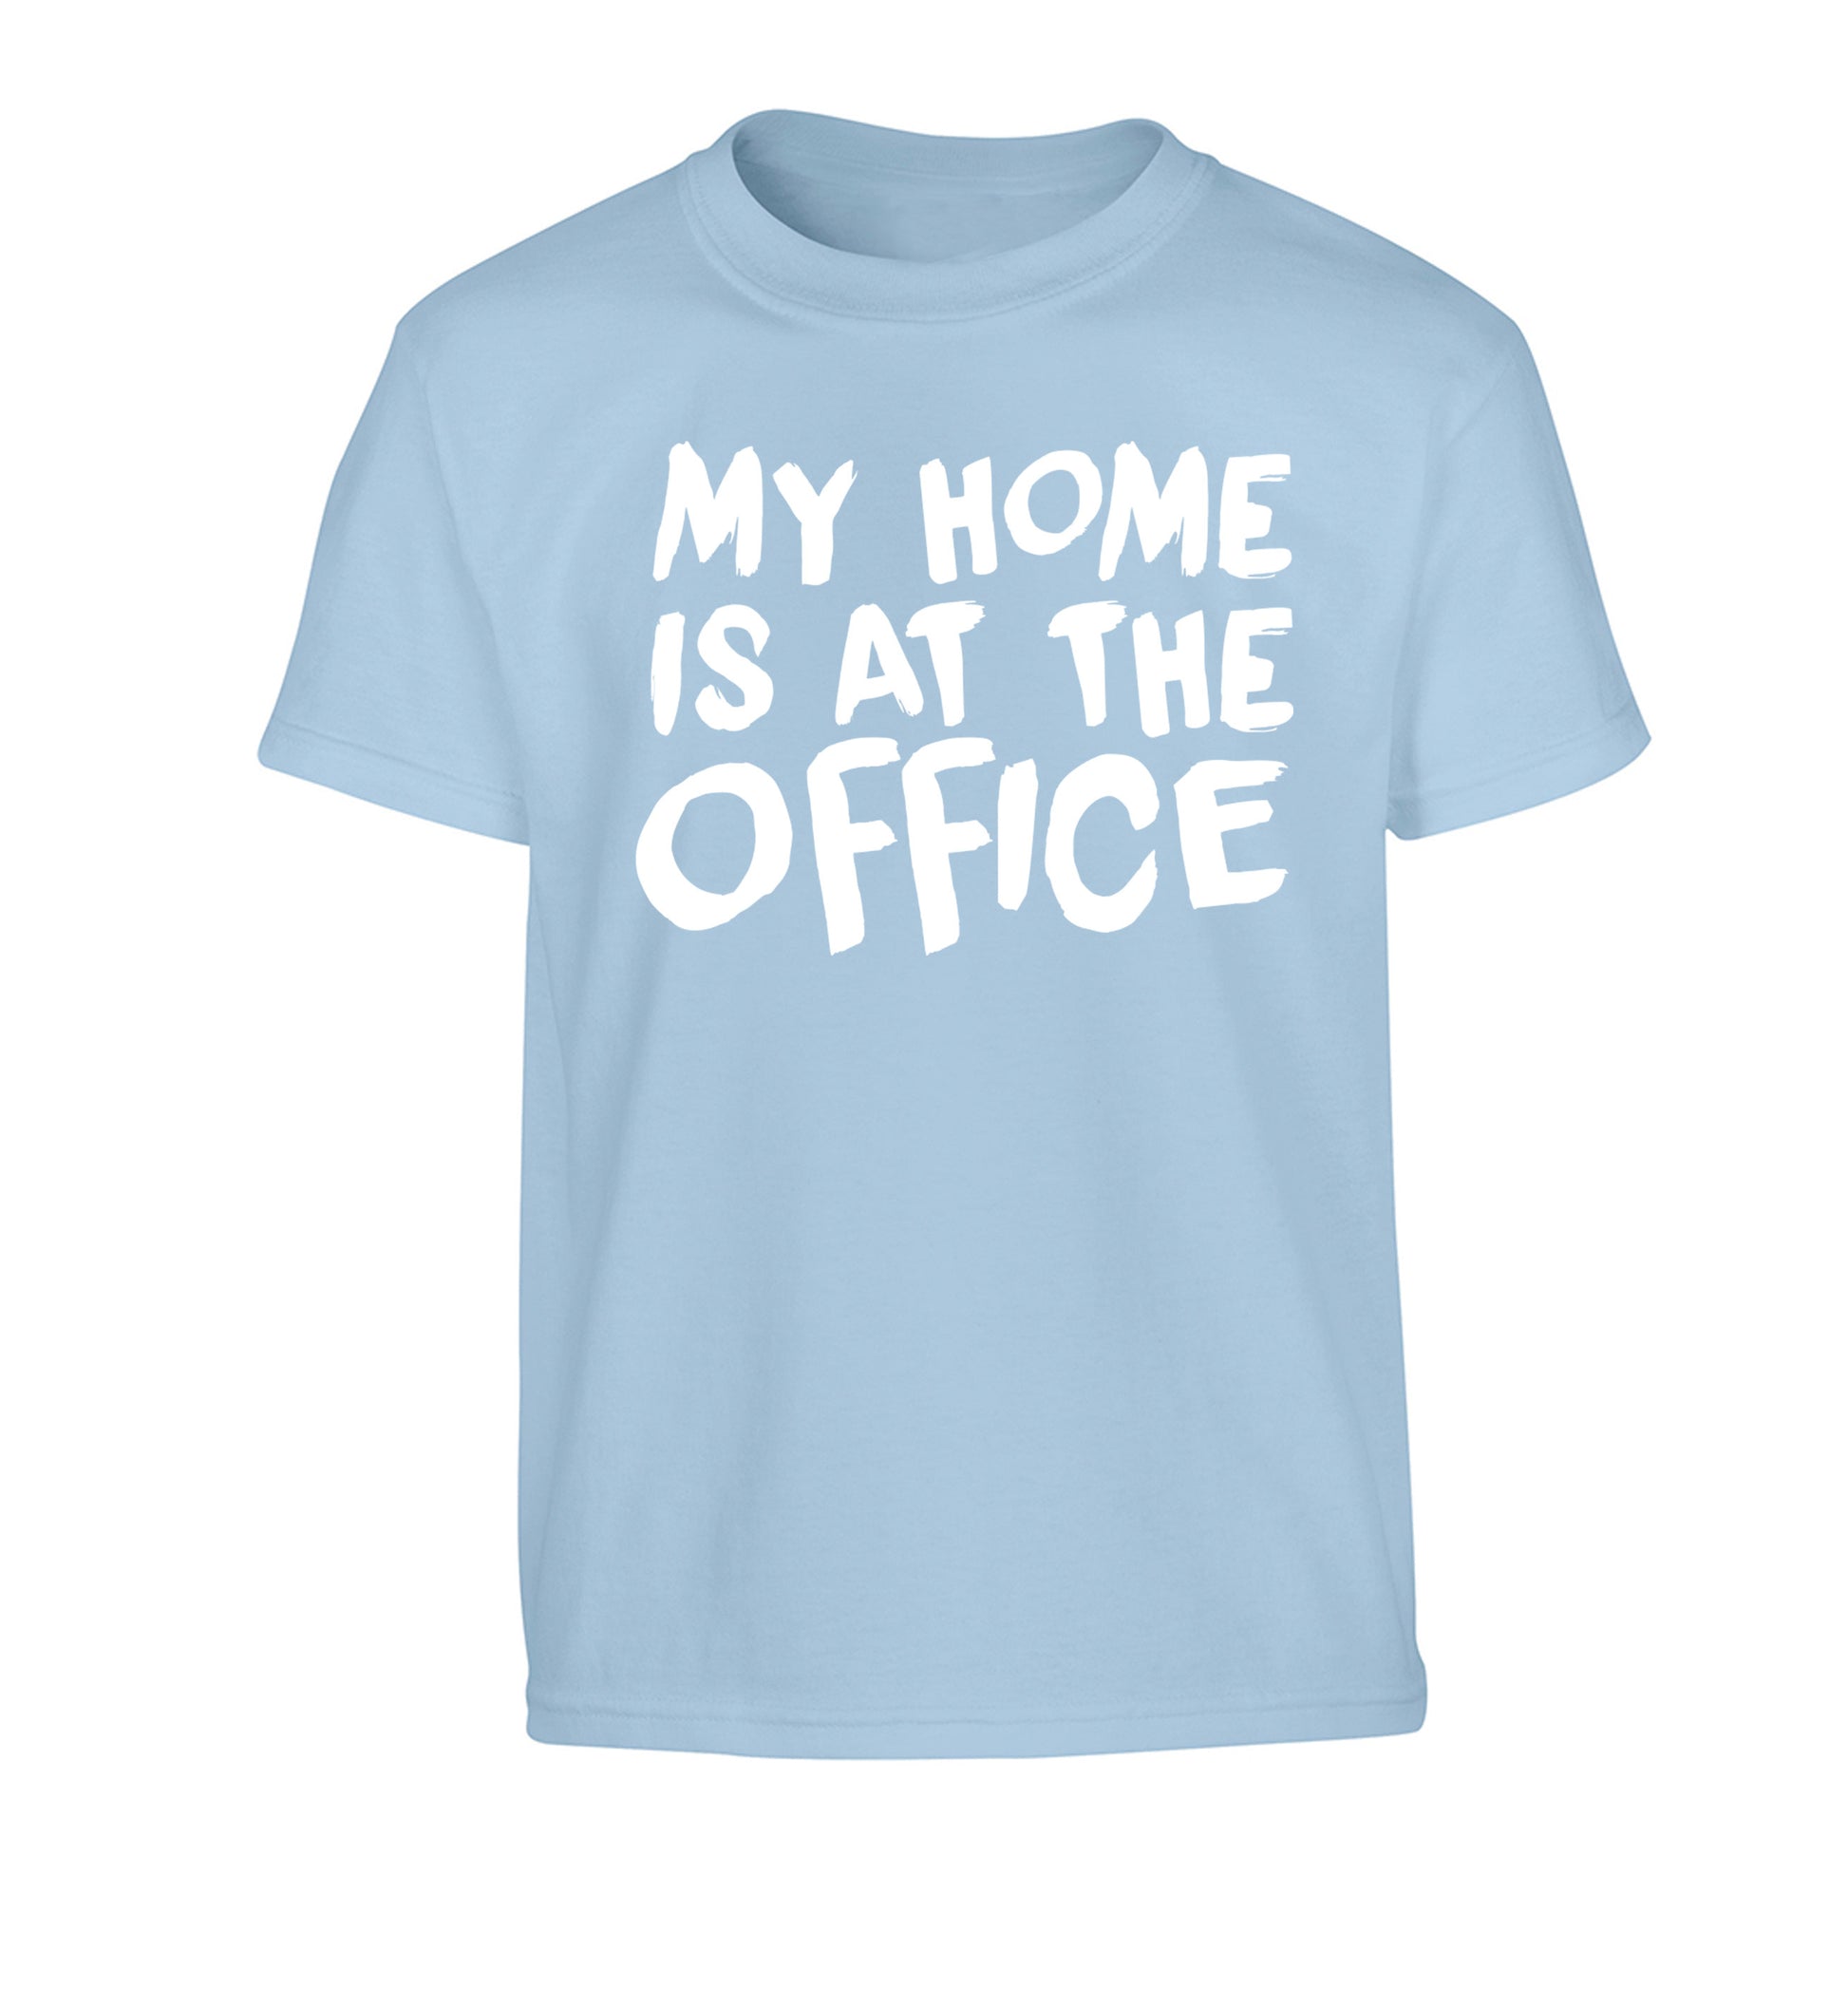 My home is at the office Children's light blue Tshirt 12-14 Years